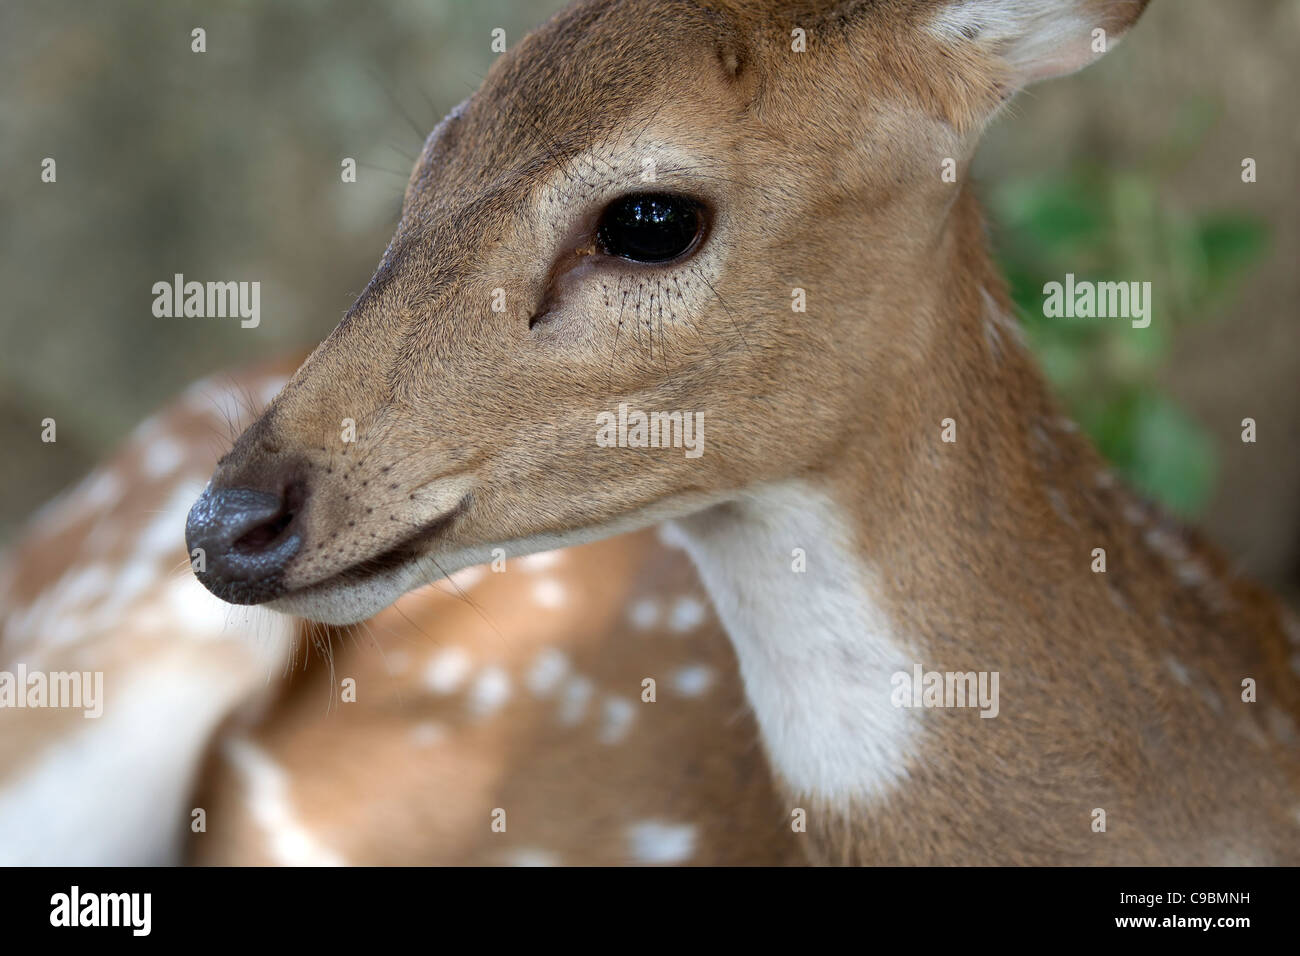 Chital 'spotted deer' 'Axis axis' mammal herbivore 'Indian Wildlife' Portrait Stock Photo